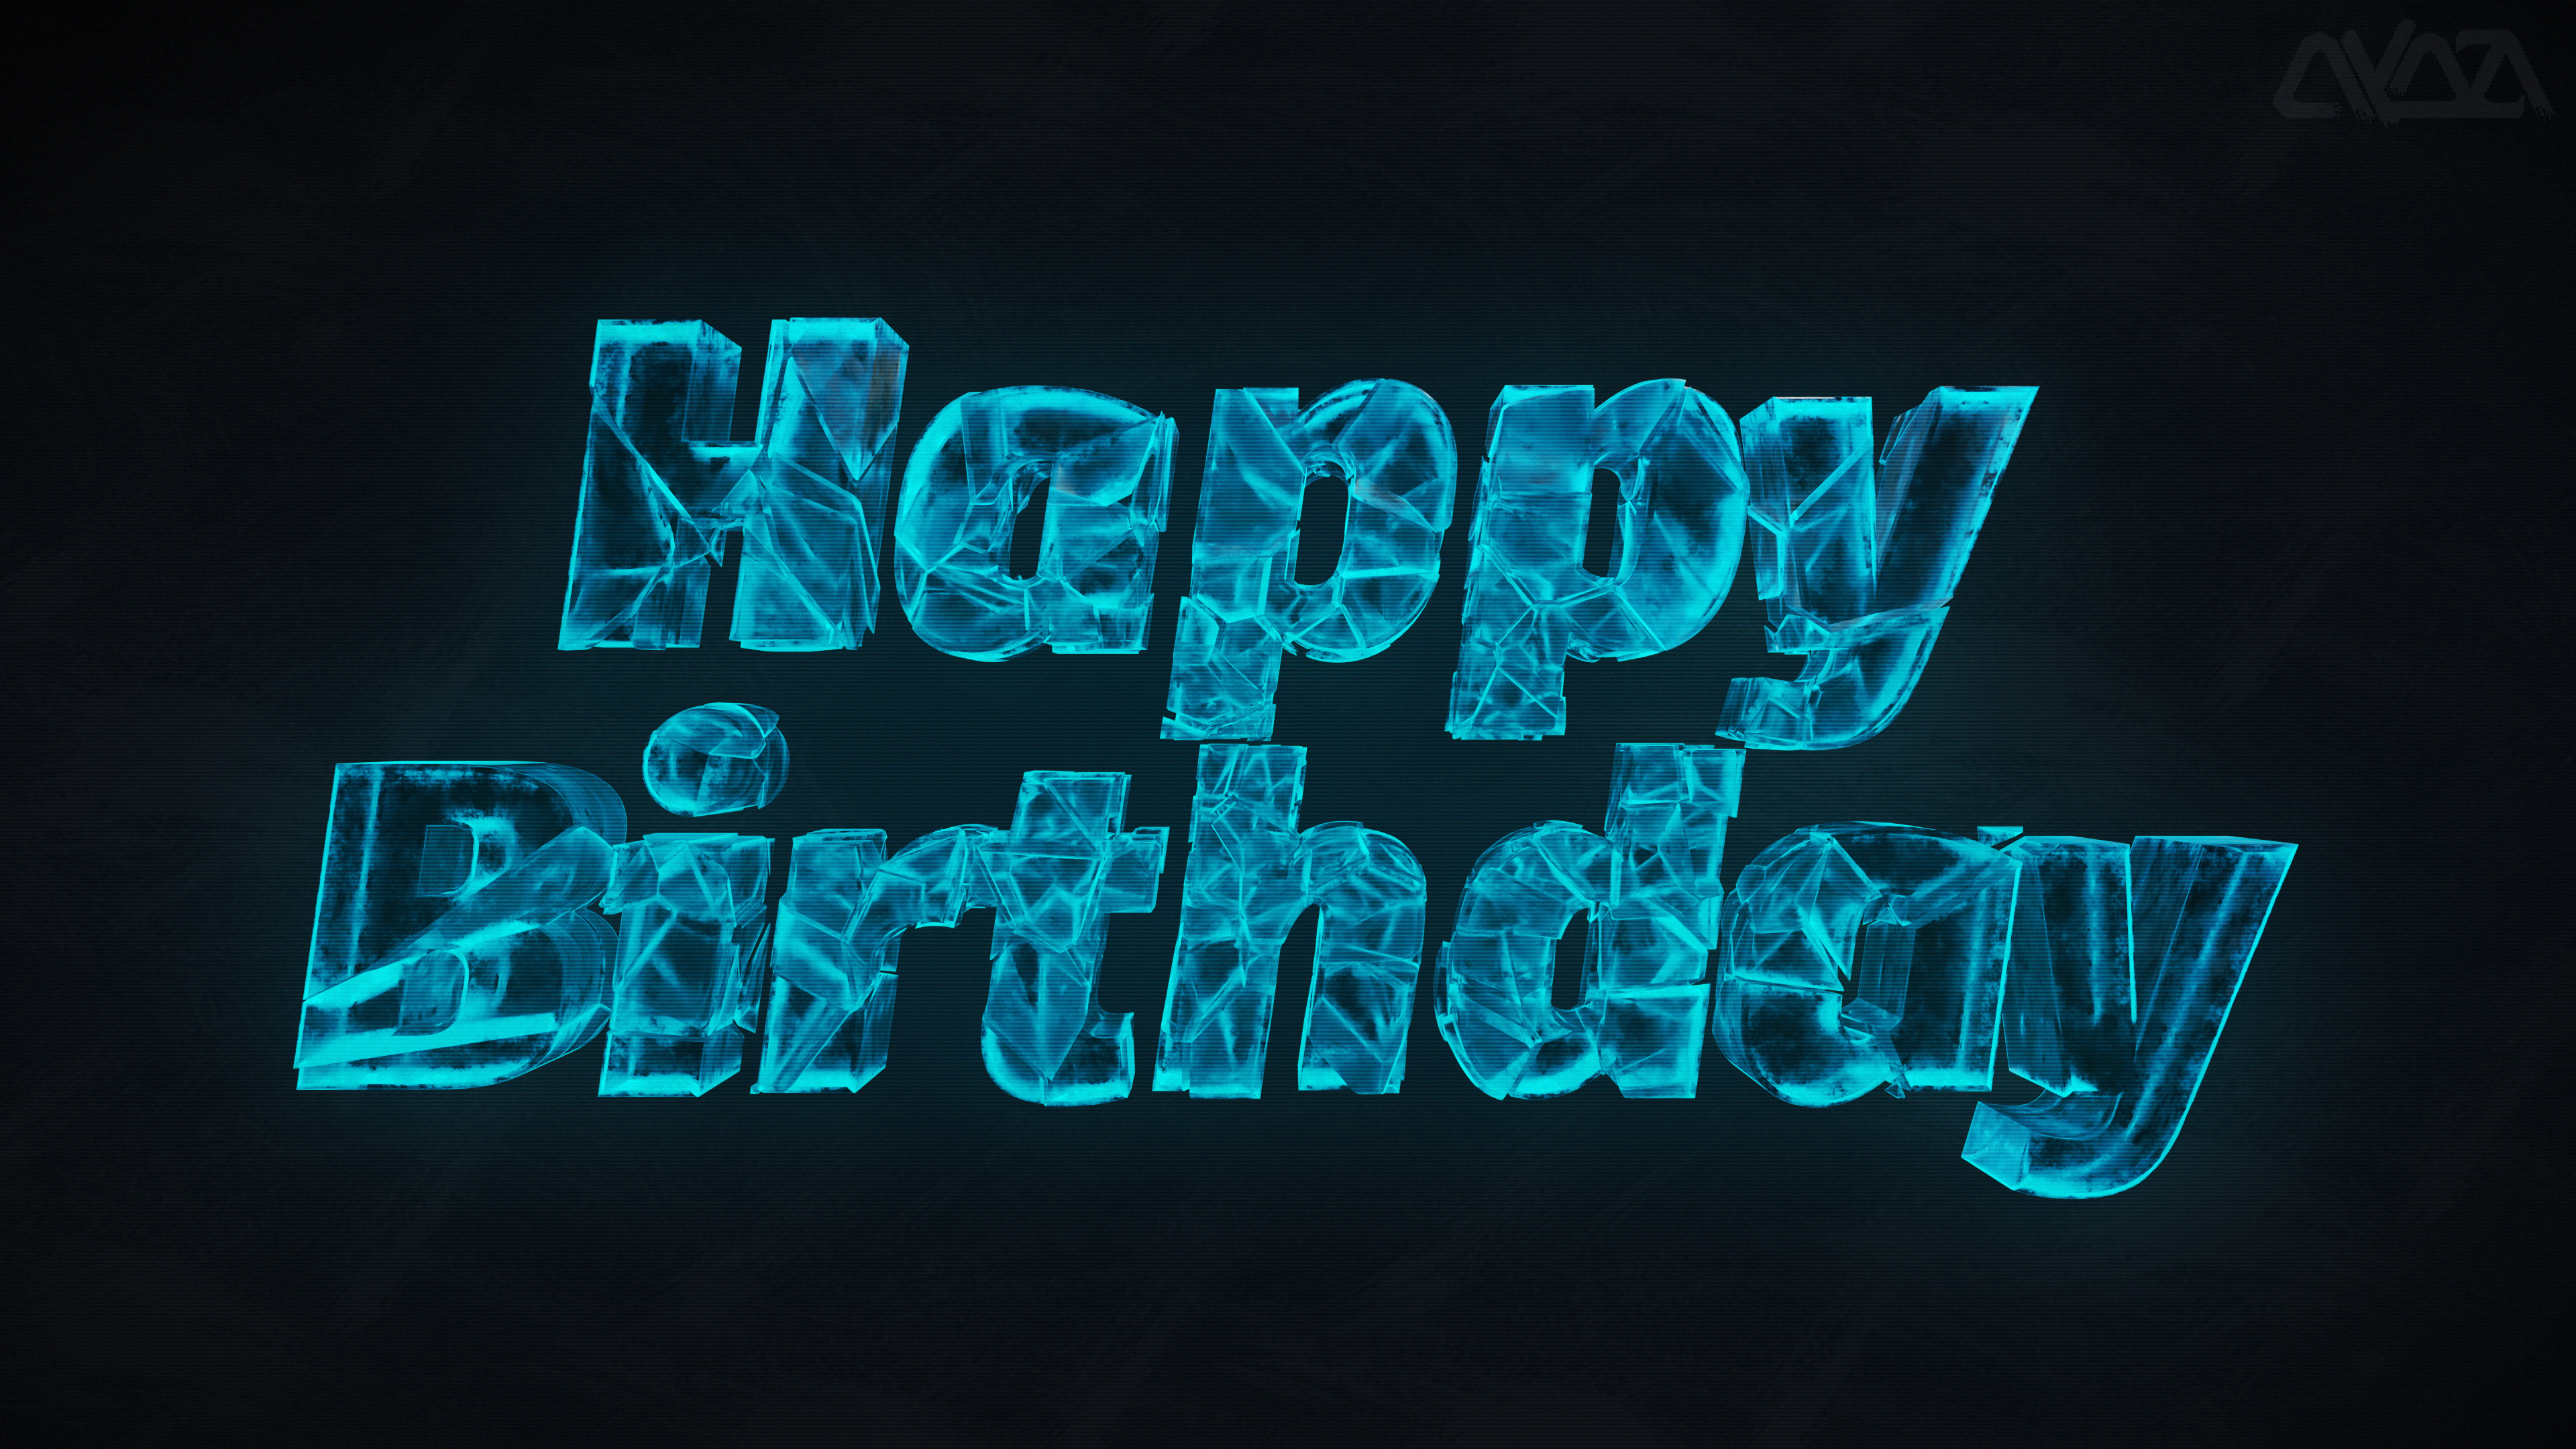 General 3840x2160 birthday Blender photoshopped ice text ice text Cinema 4D cell shading simple background minimalism digital art